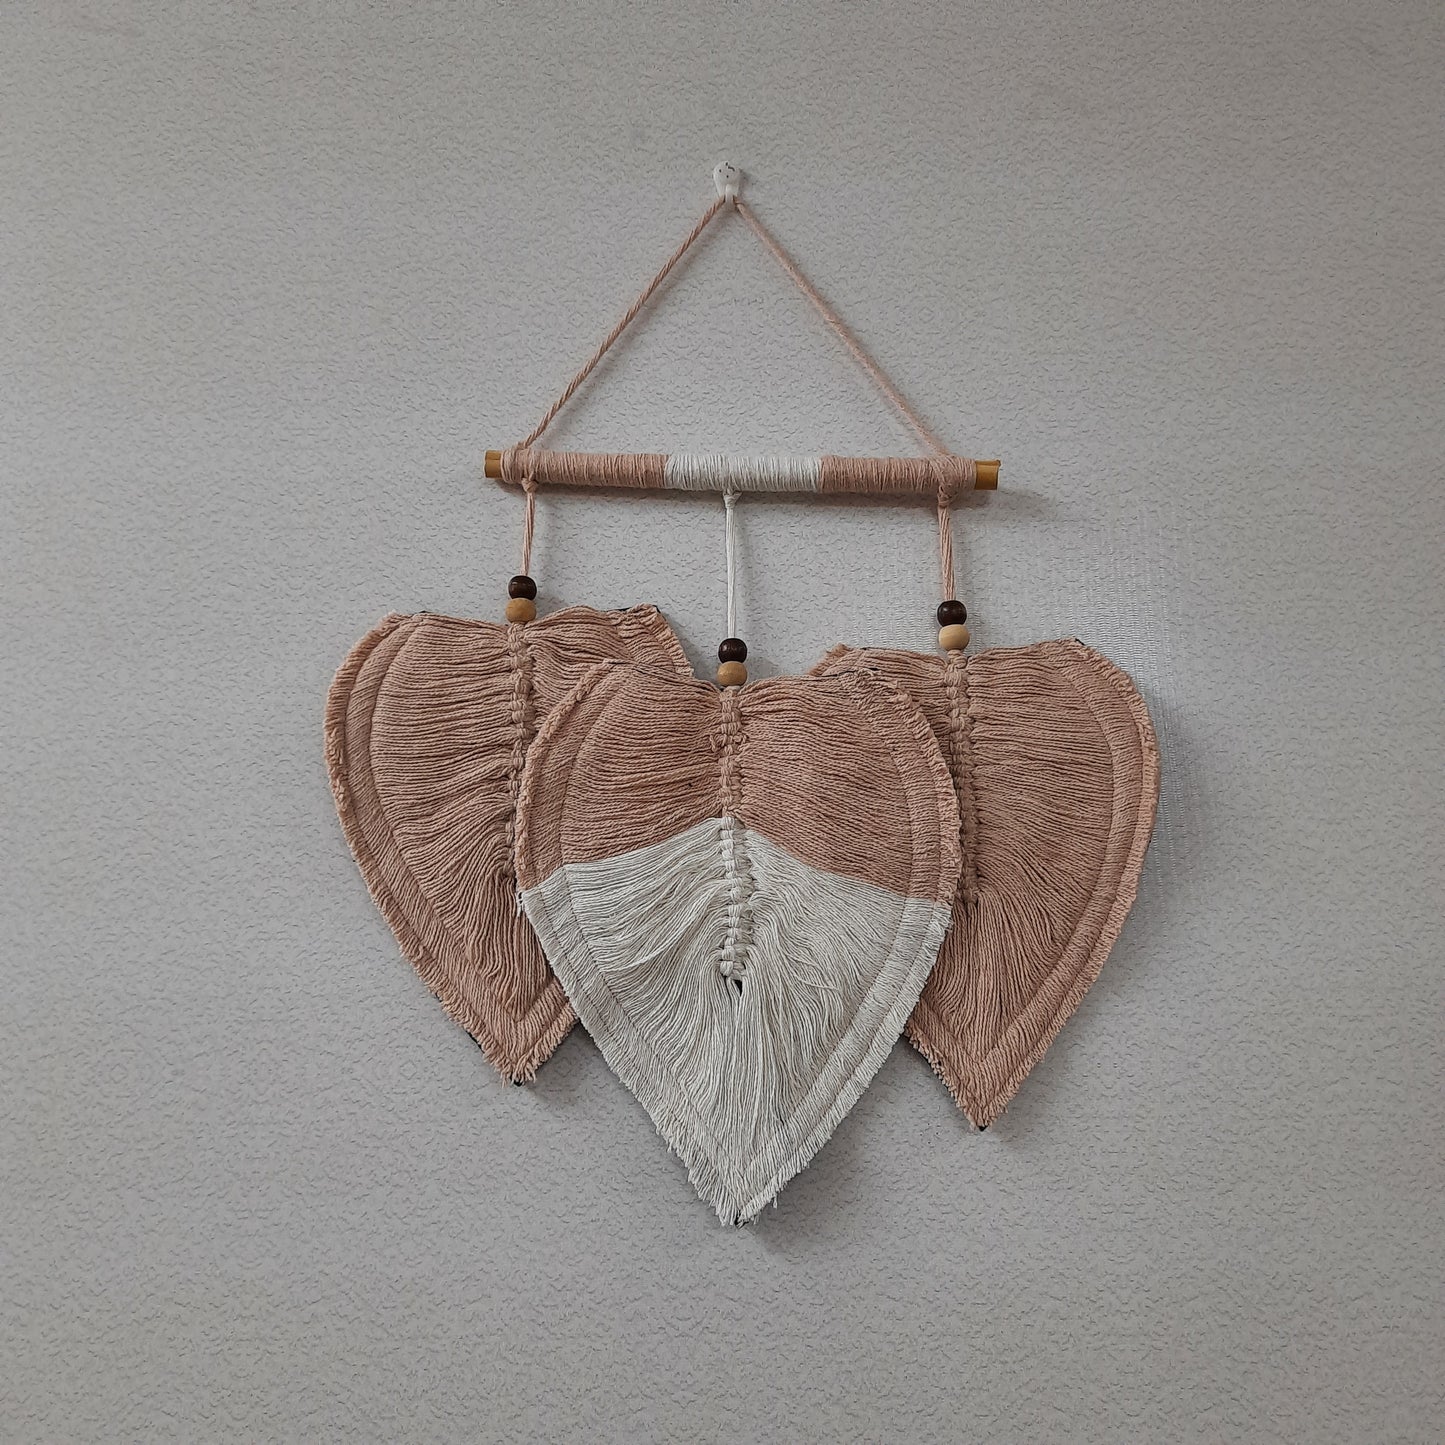 Avioni Feather Macrame Wall Hanging With Beads, Macrame Knotted Wall Tapestry, Living Room Bedroom Interior Decor-Peach And White